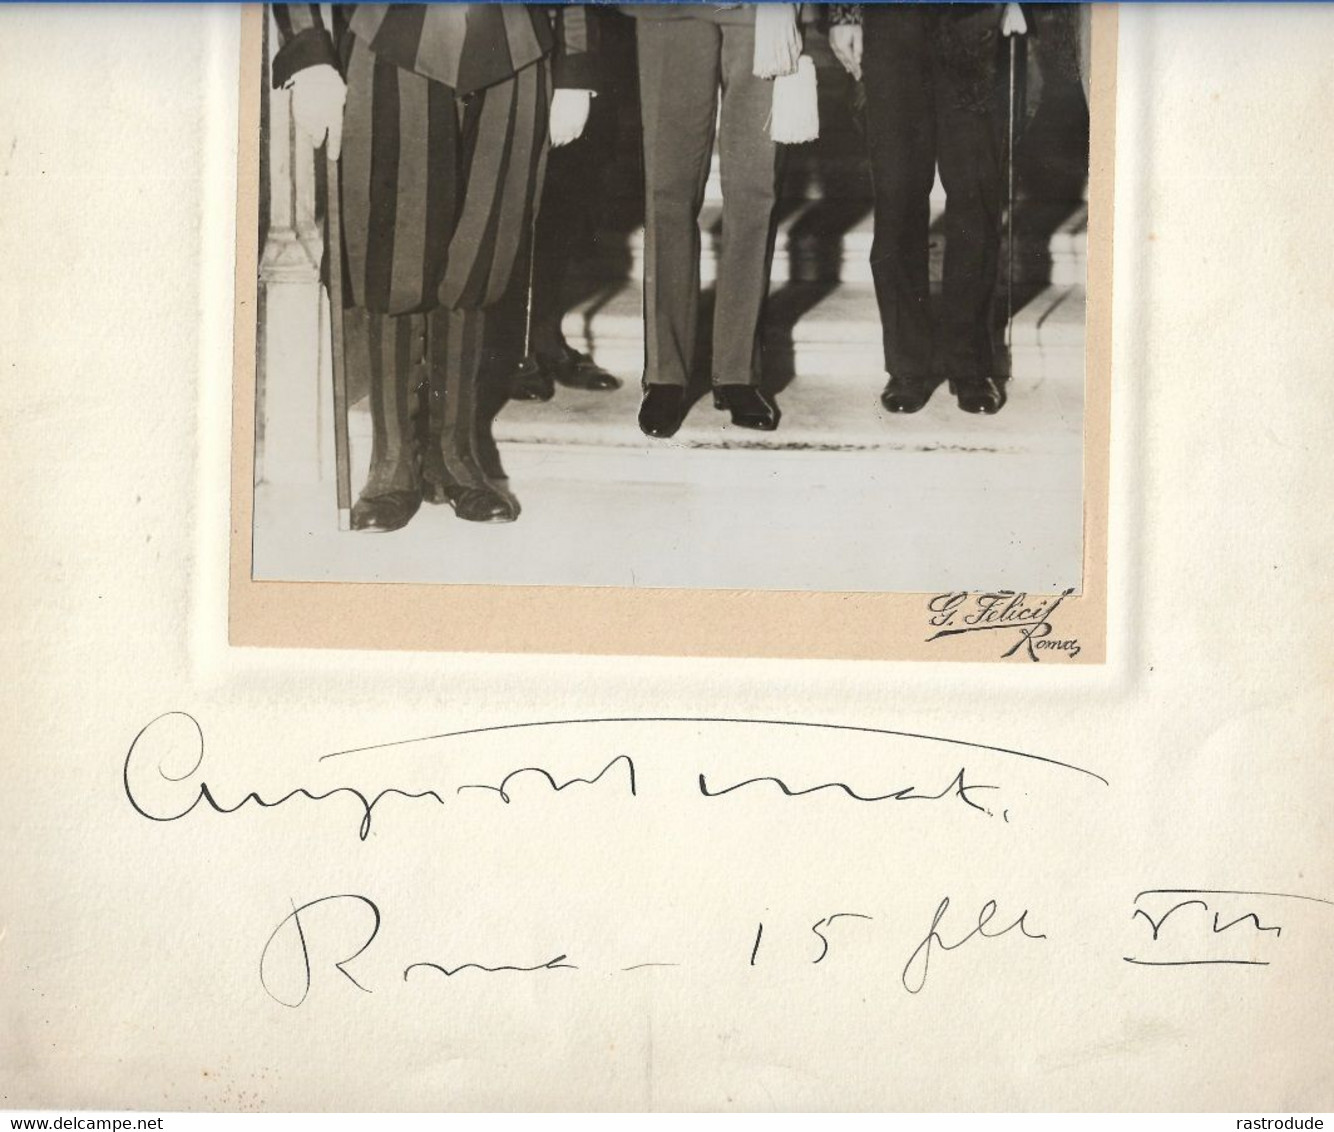 1930s ORIGINAL PHOTOGRAPH Of AUGUSTO TURATI In The VATICAN W. SWISS GUARD By GIUSEPPE FELICI - SIGNED - Foto Dedicate